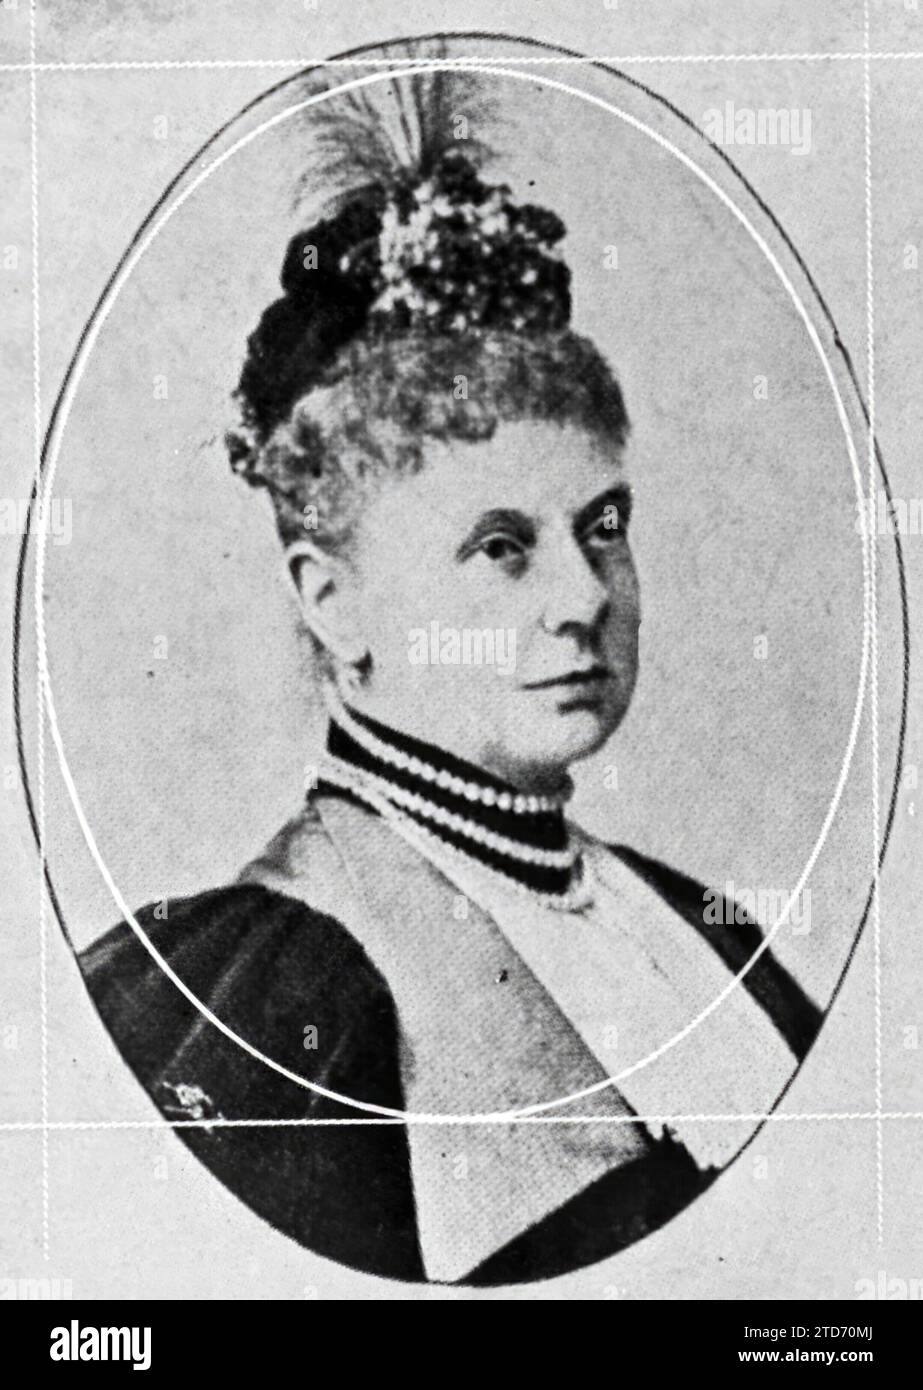 02/28/1906. Princess Maria Luisa Alexandrina of Prussia, Dowager Duchess of Mecklenburg Shwerin, who has just passed away. She was born in Berlin, on February 1, 184?, and married on December 9, 1865, Frederick William, Duke of Mecklenburg Shwerin - Approximate date. Credit: Album / Archivo ABC Stock Photo